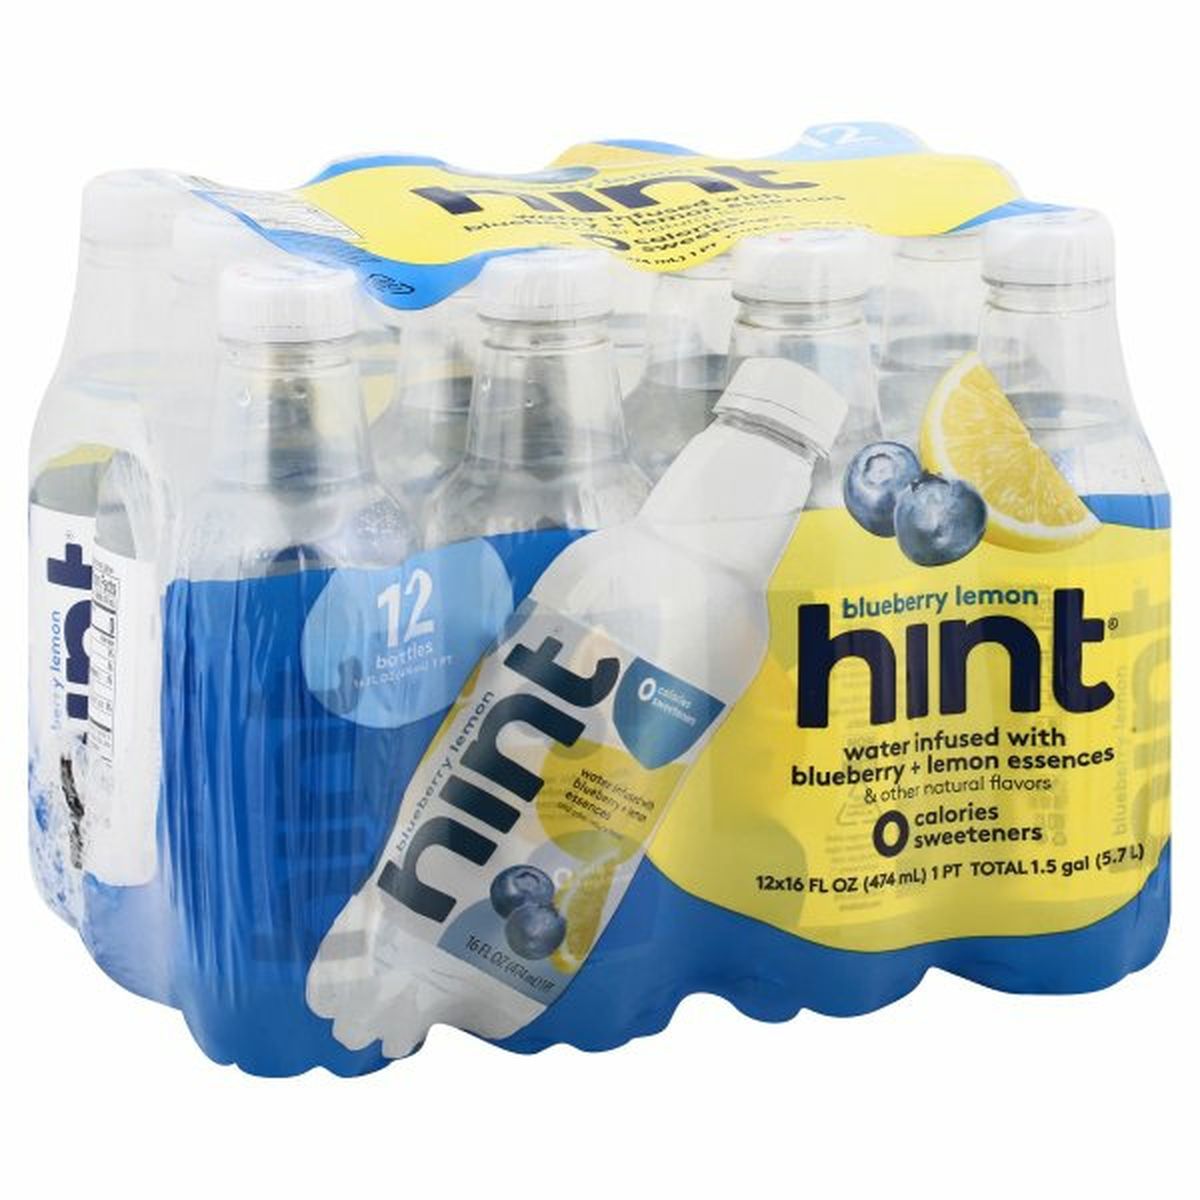 Calories in hint Water, Blueberry Lemon